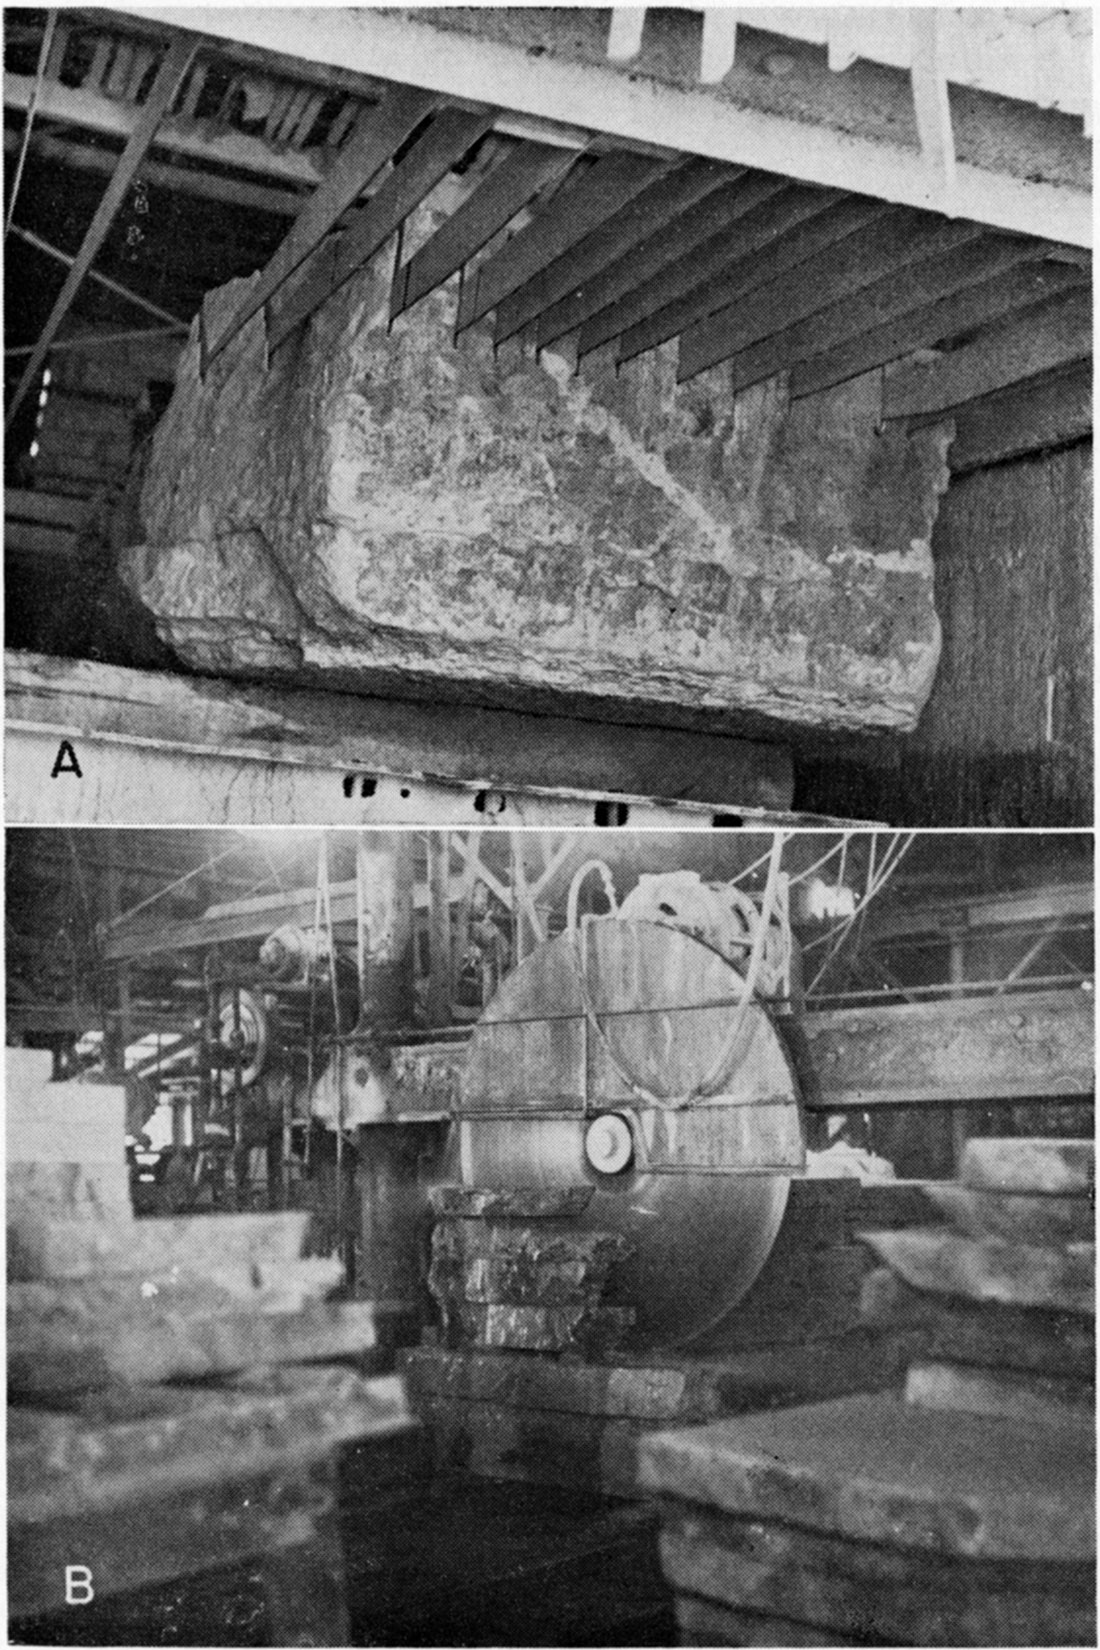 Two black and white photos; top is Fort Riley Limestone, gang saws cutting slabs of stone, Silverdale Limestone Company; bottom is Fort Riley Limestone, circular saw trimming cut slabs of stone, Walker Cut Stone Company plant, Junction City.